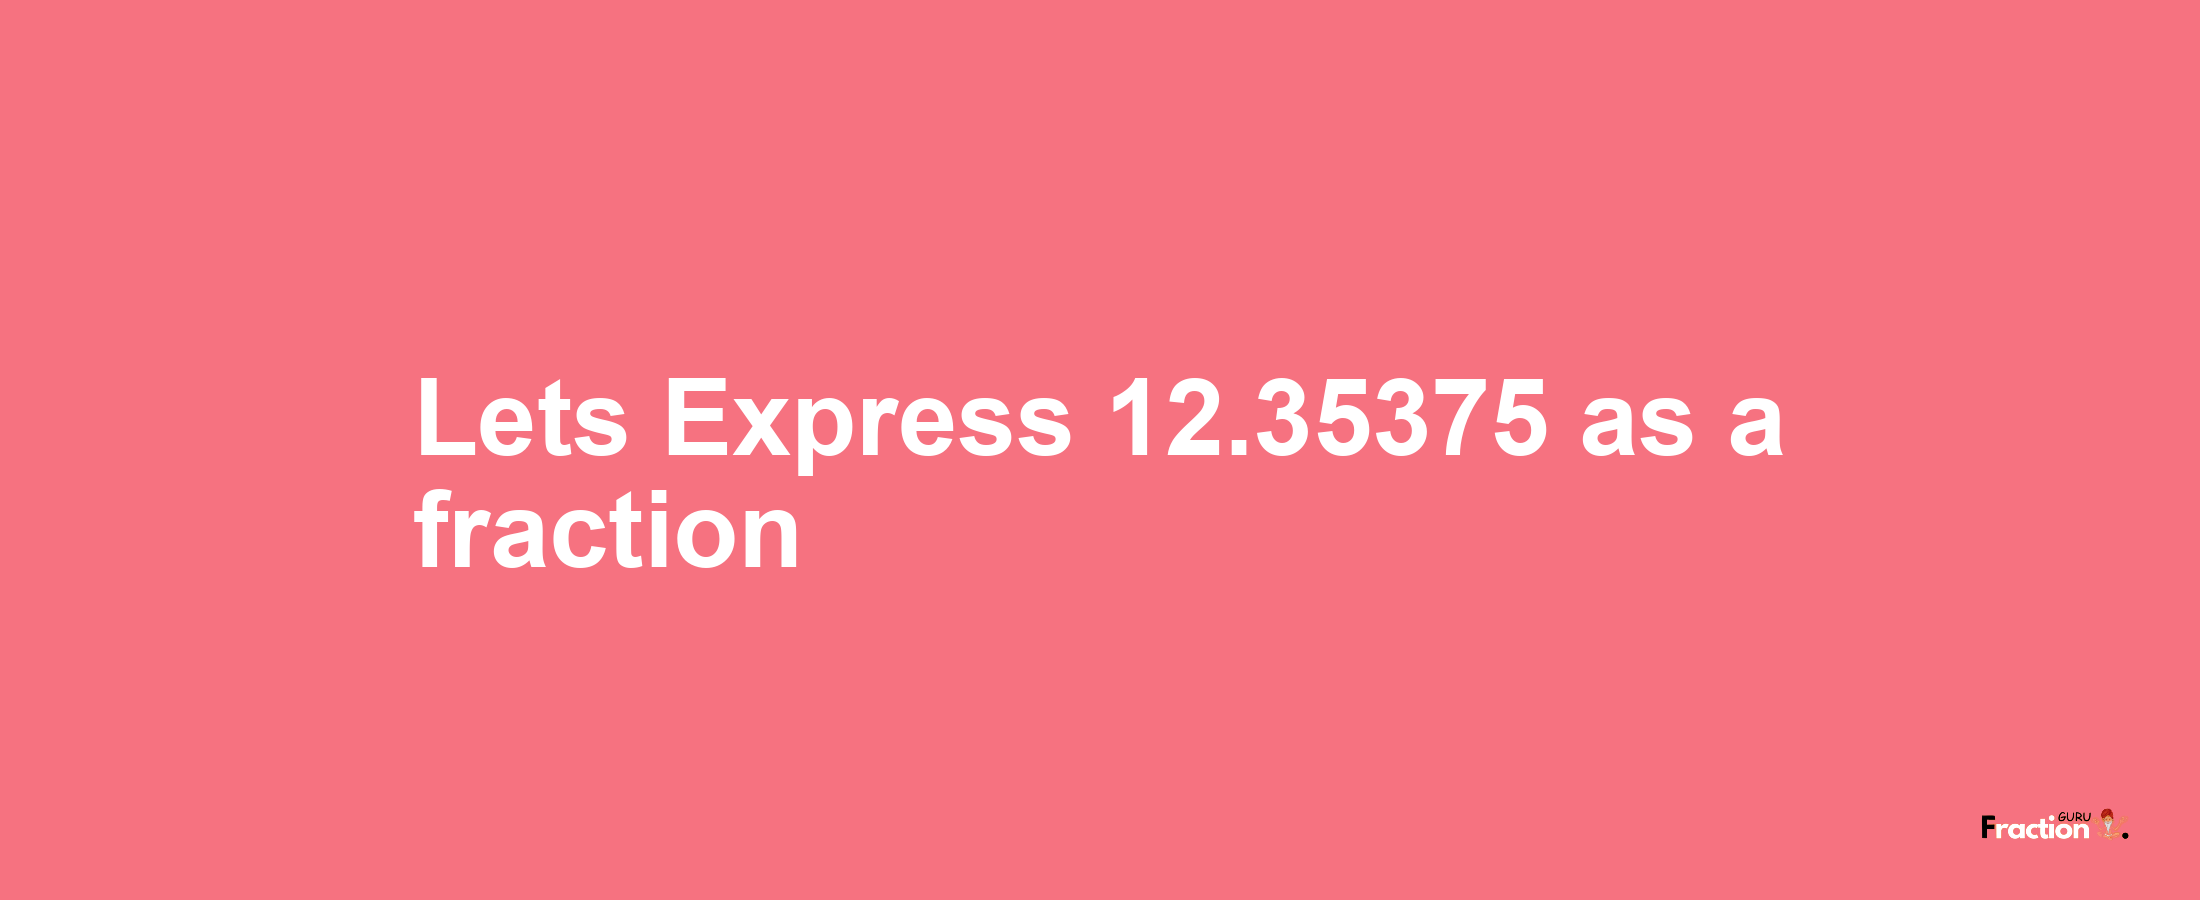 Lets Express 12.35375 as afraction